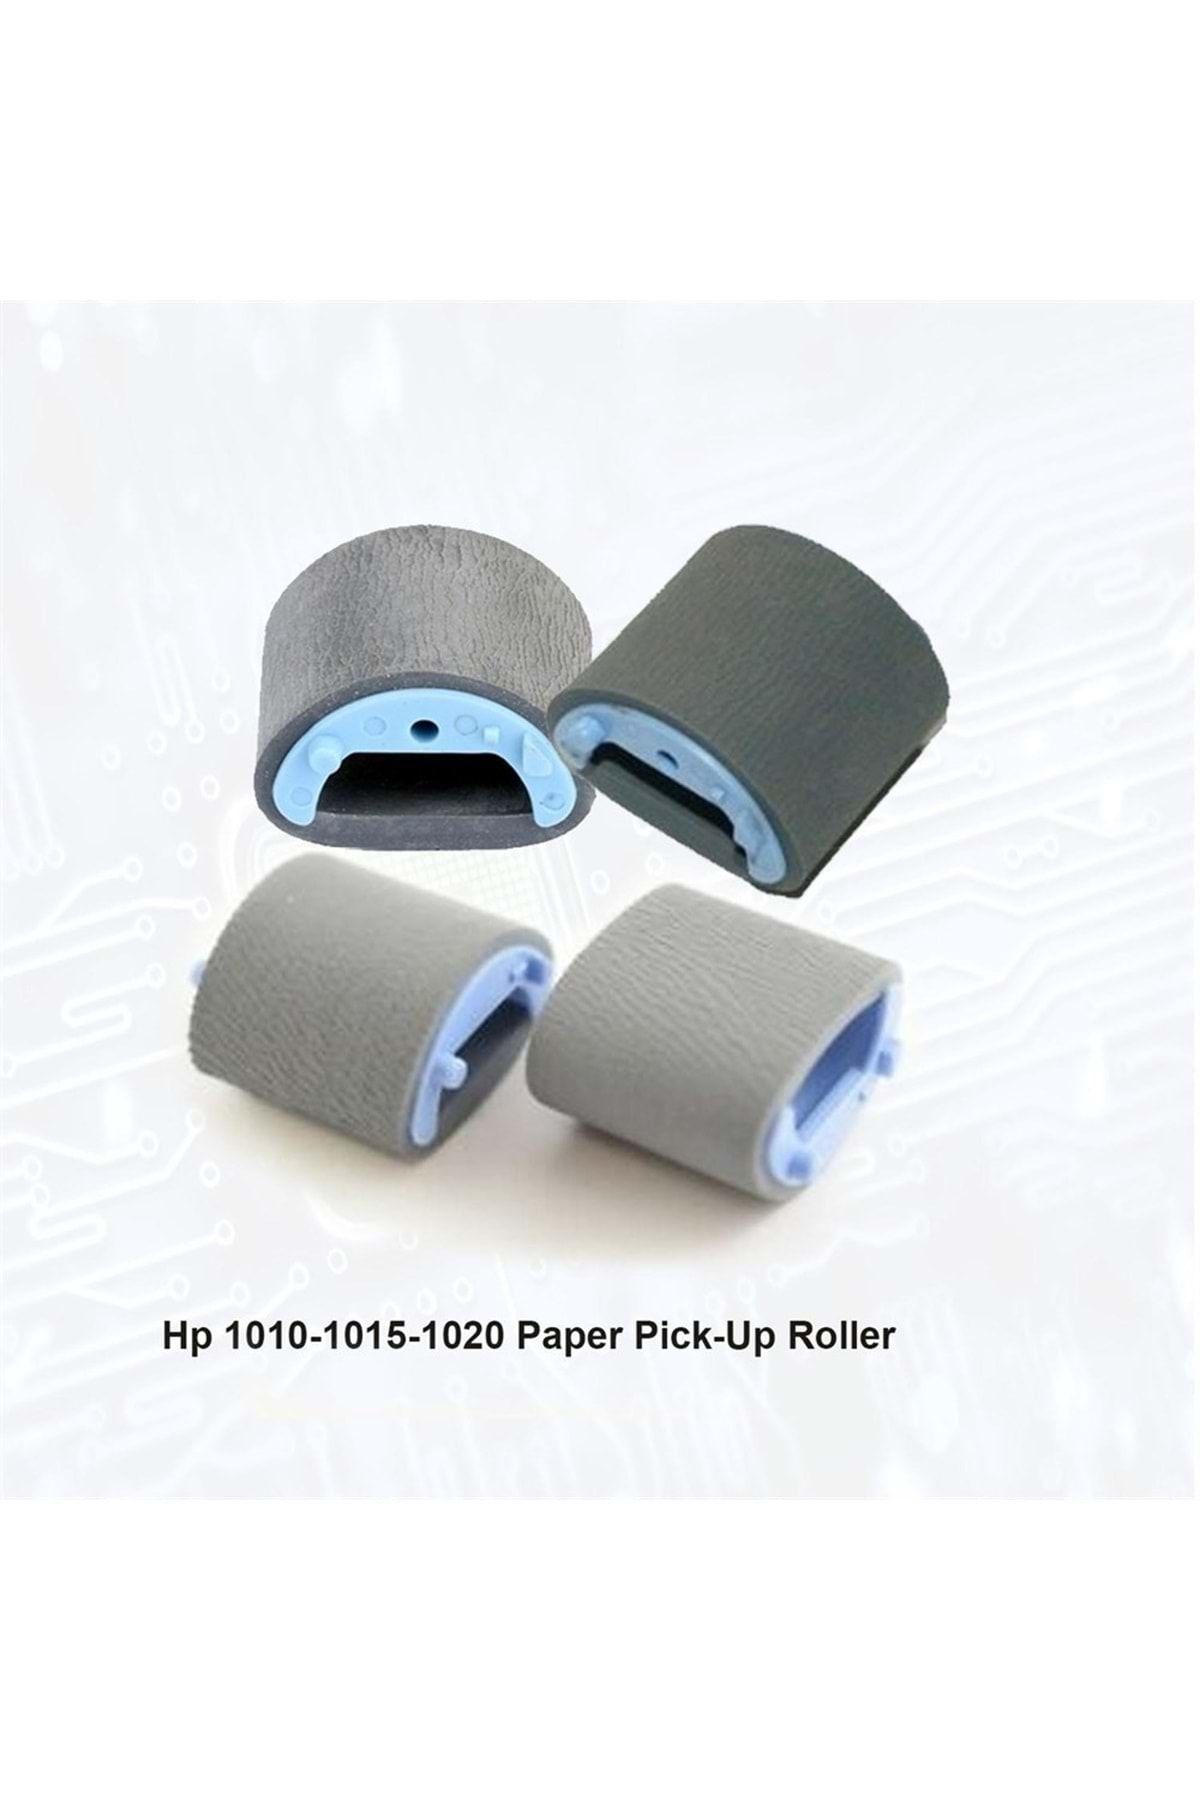 HP 1010-1015-1020 Paper Pick-up Roller